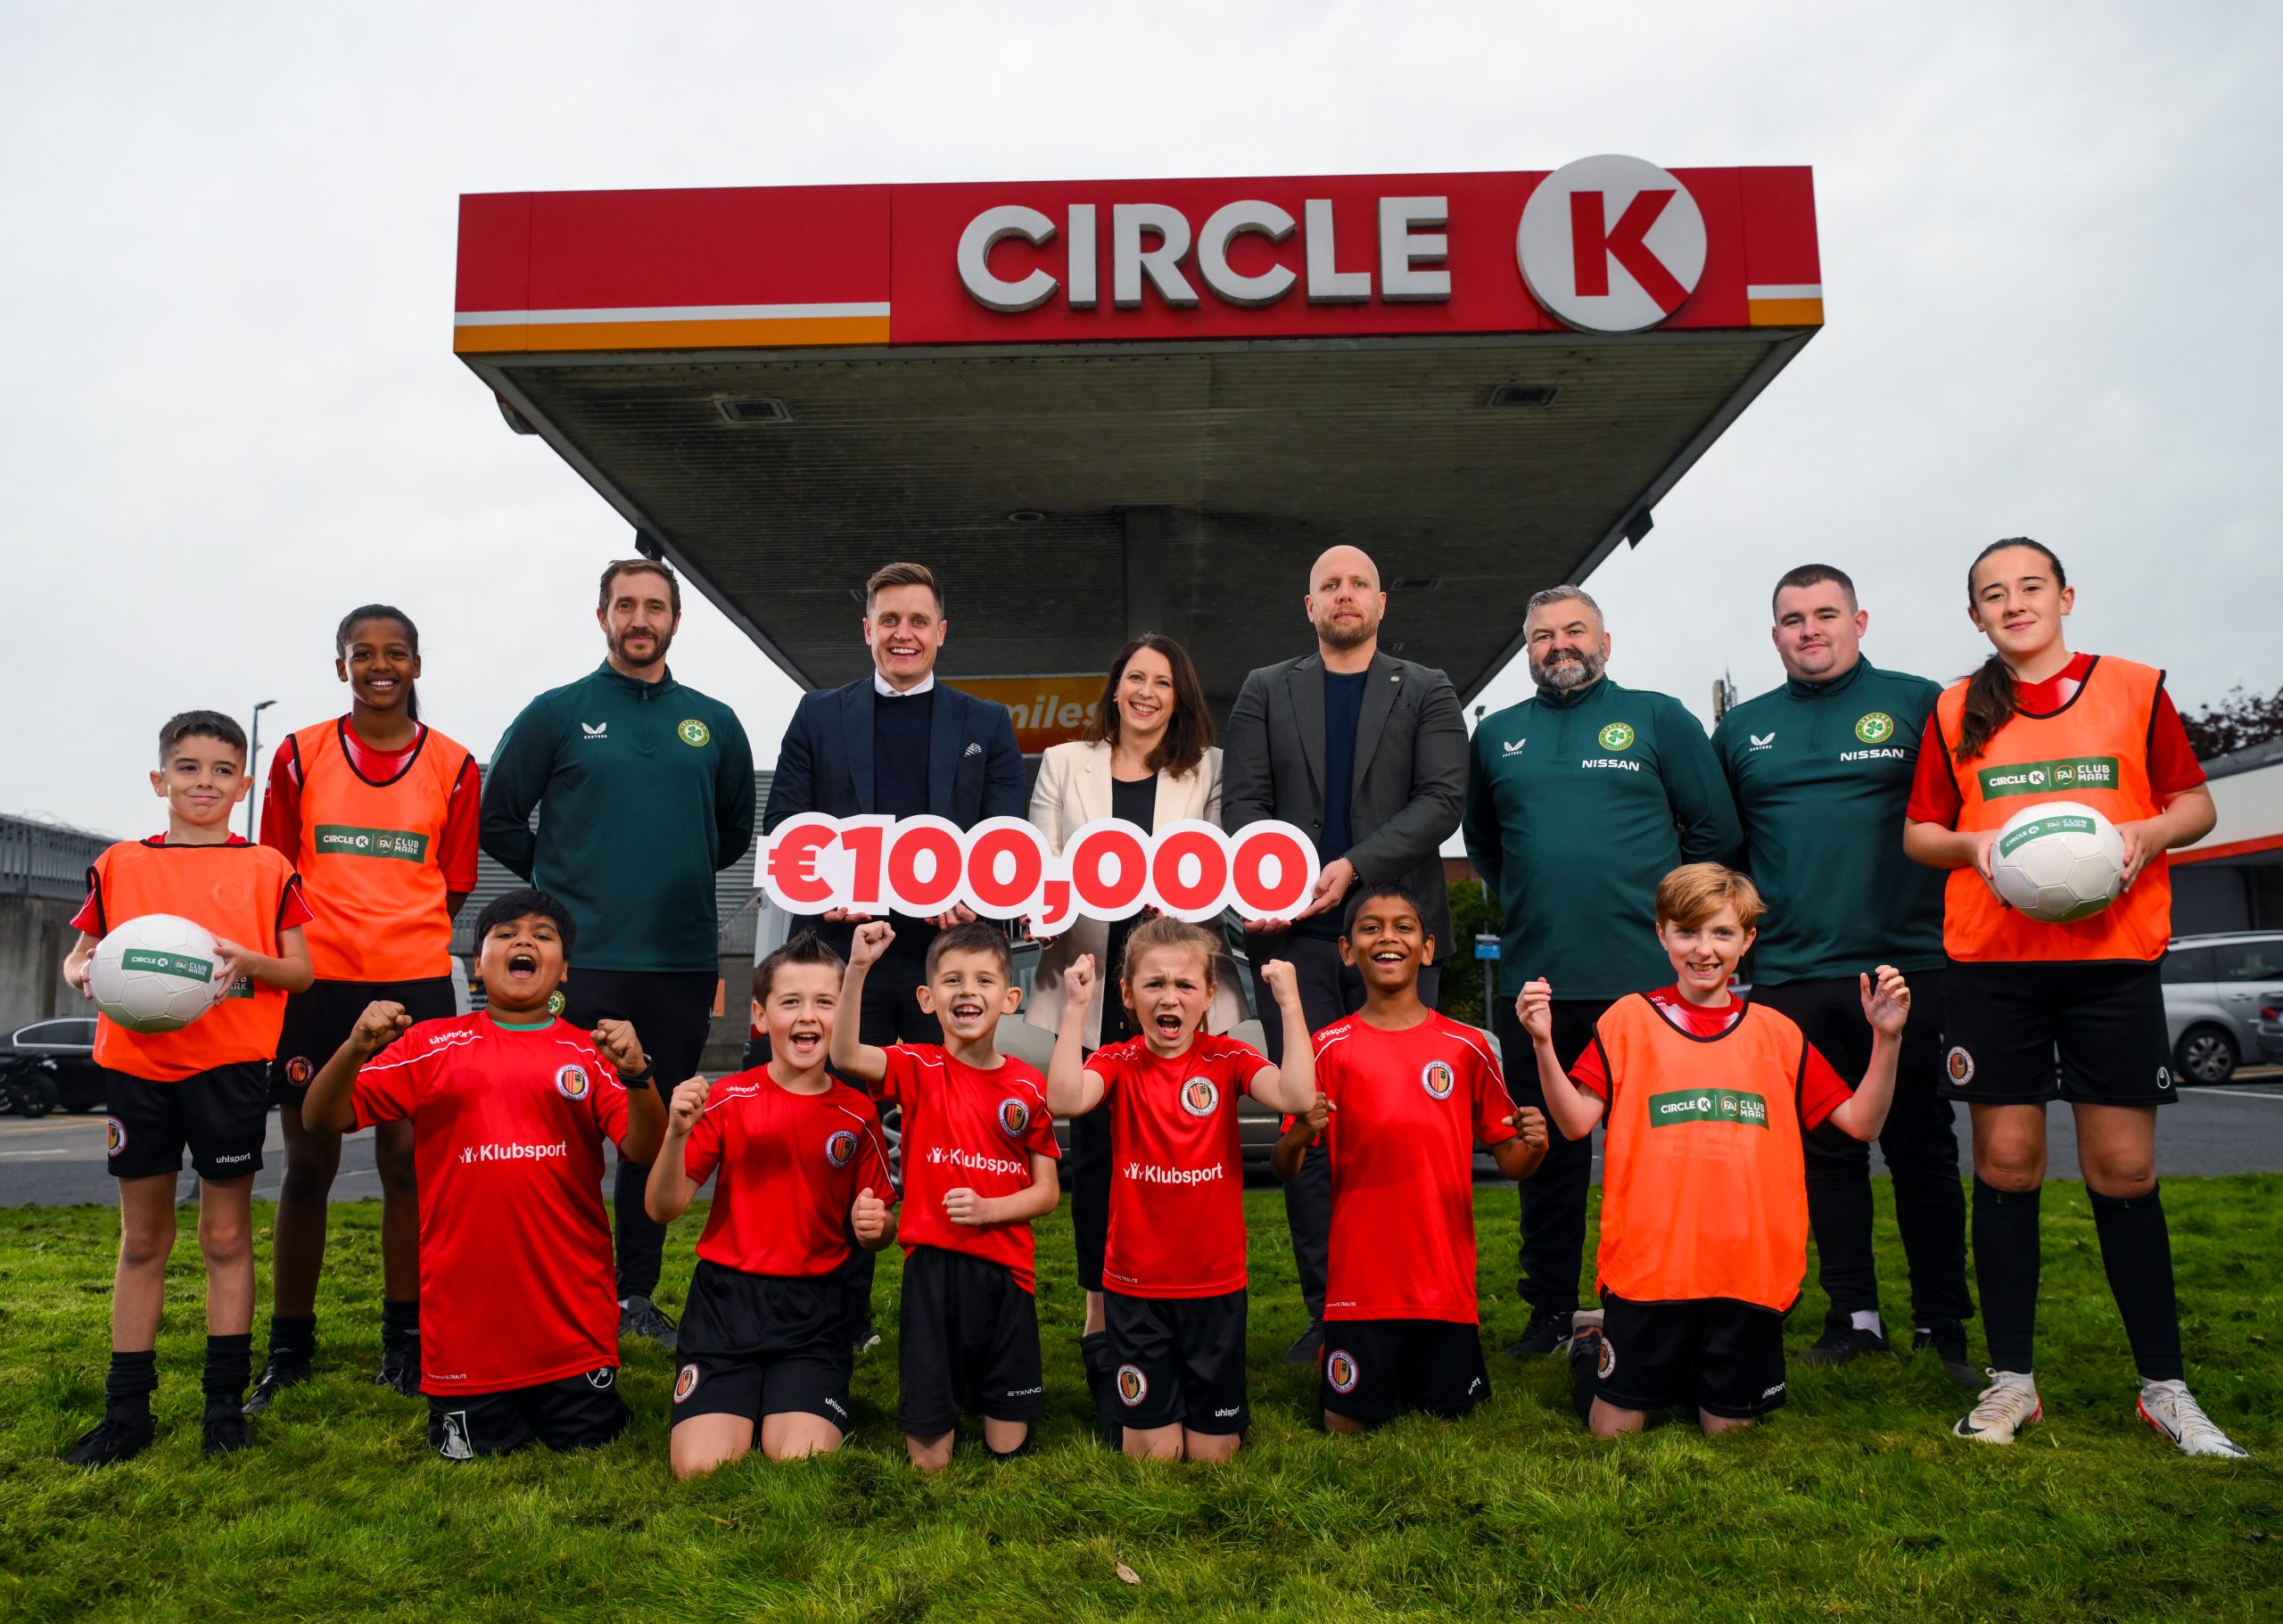 Circle K announces €100,000 giveaway for grassroots clubs nationwide